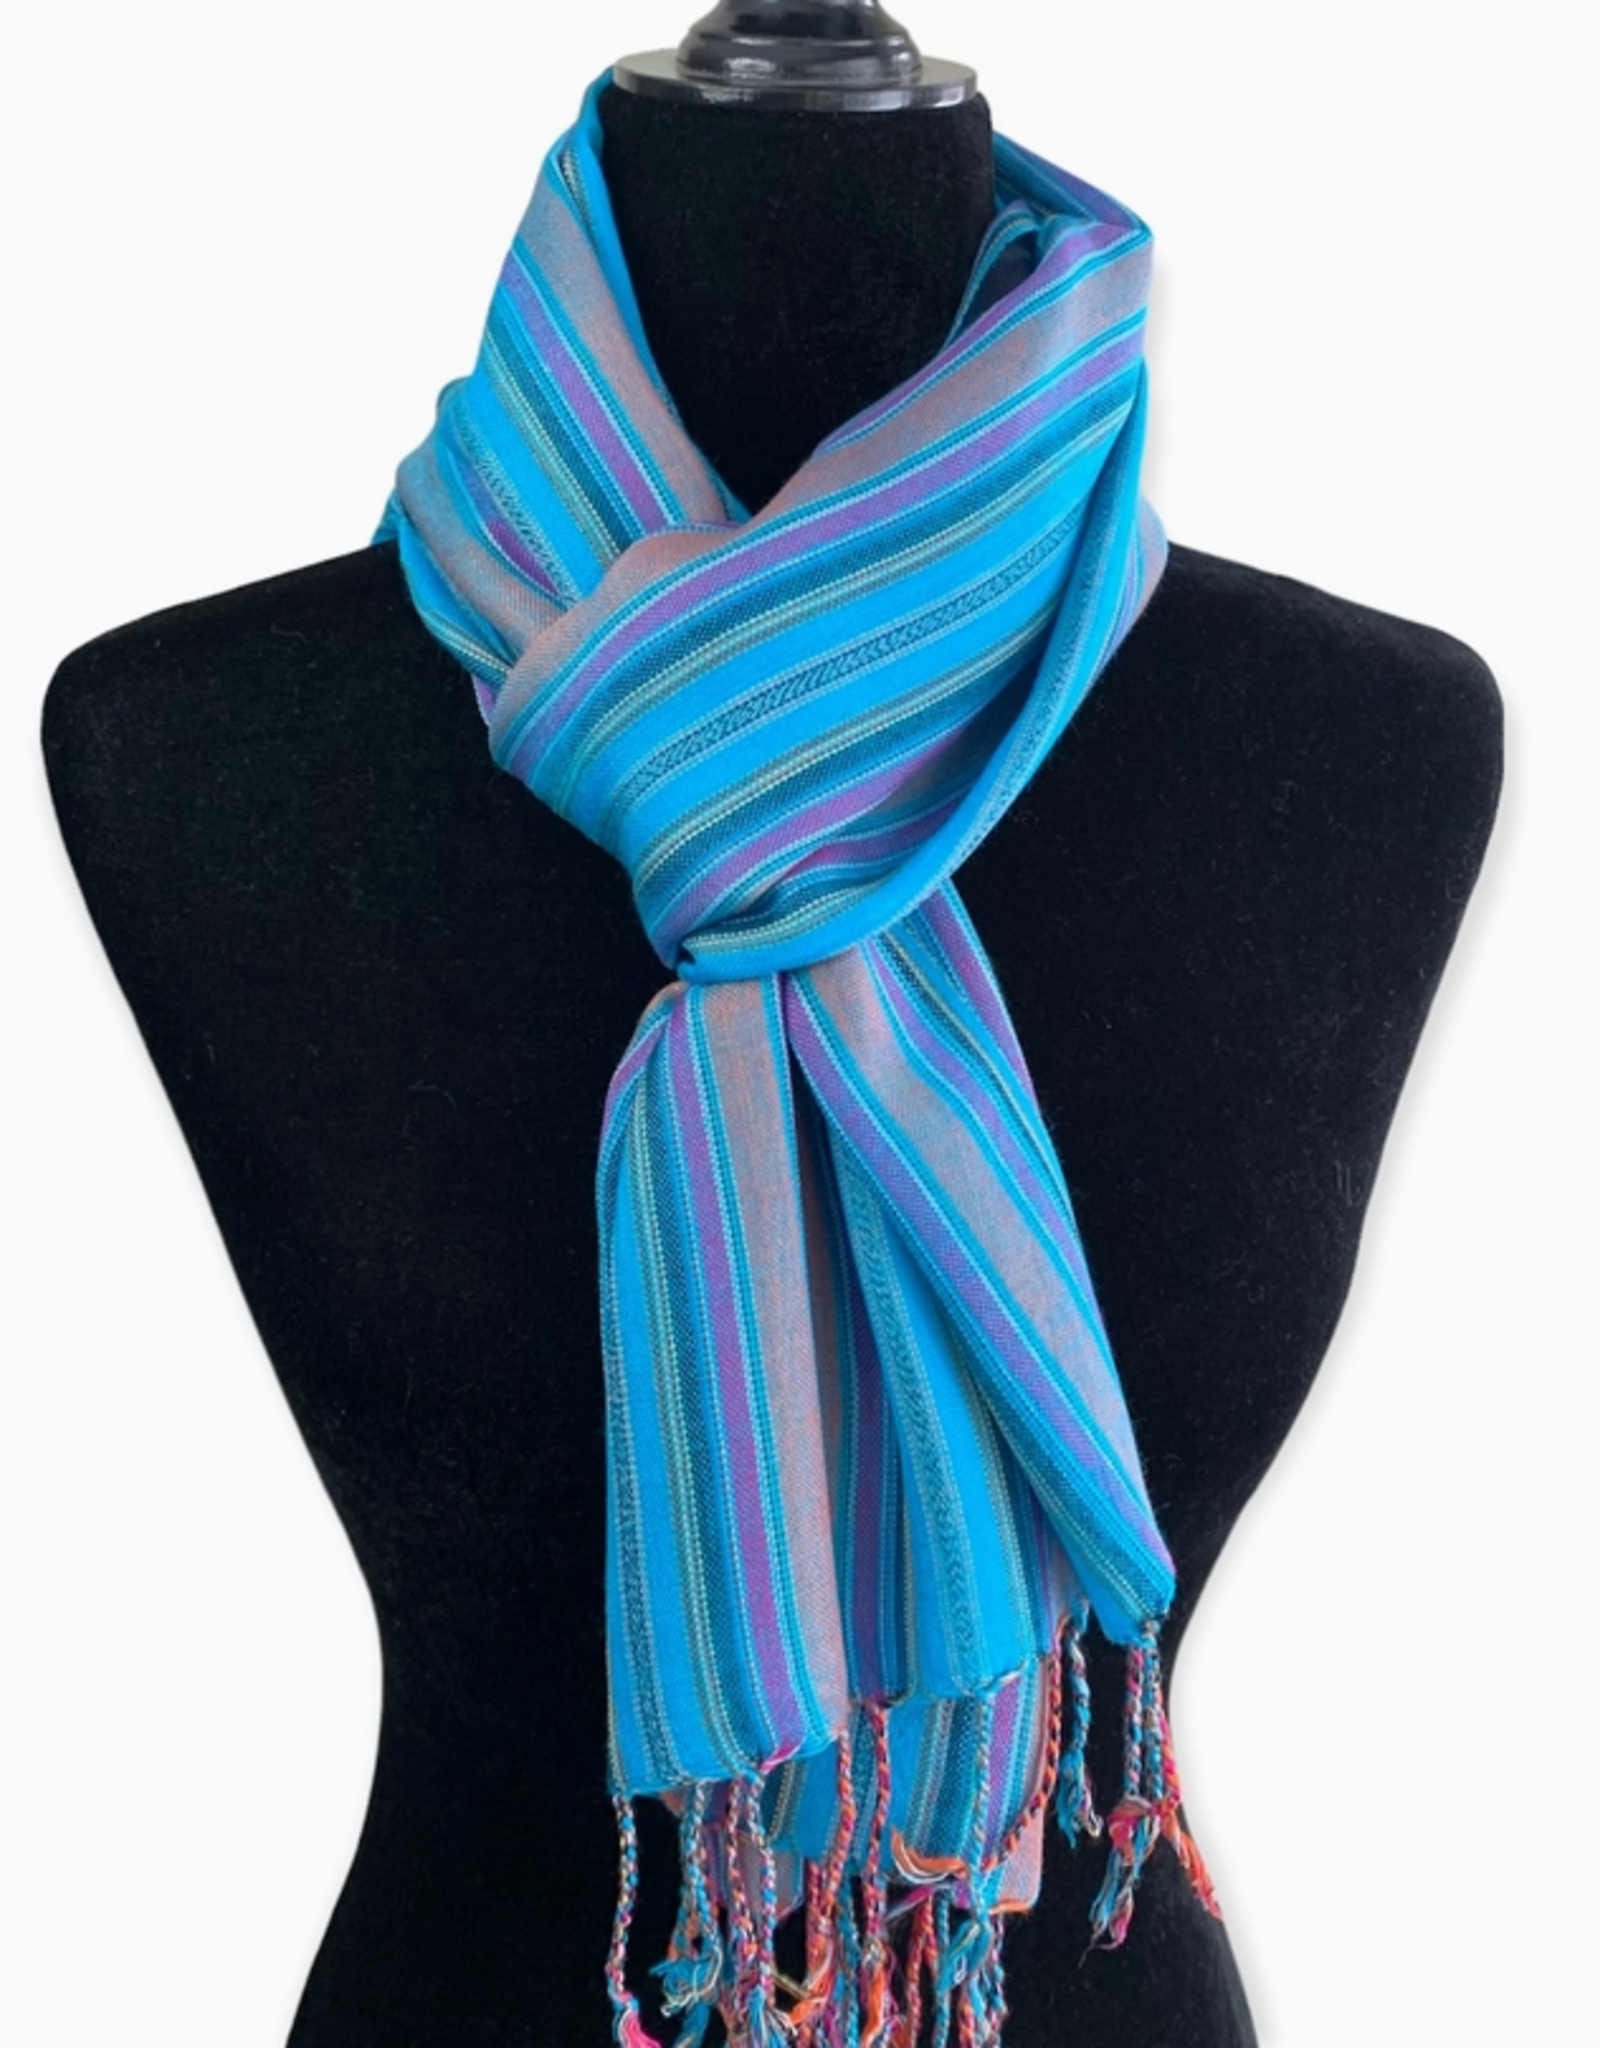 Dandarah Small Mixed Striped Handwoven Bamboo Viscose Scarf - Turquoise